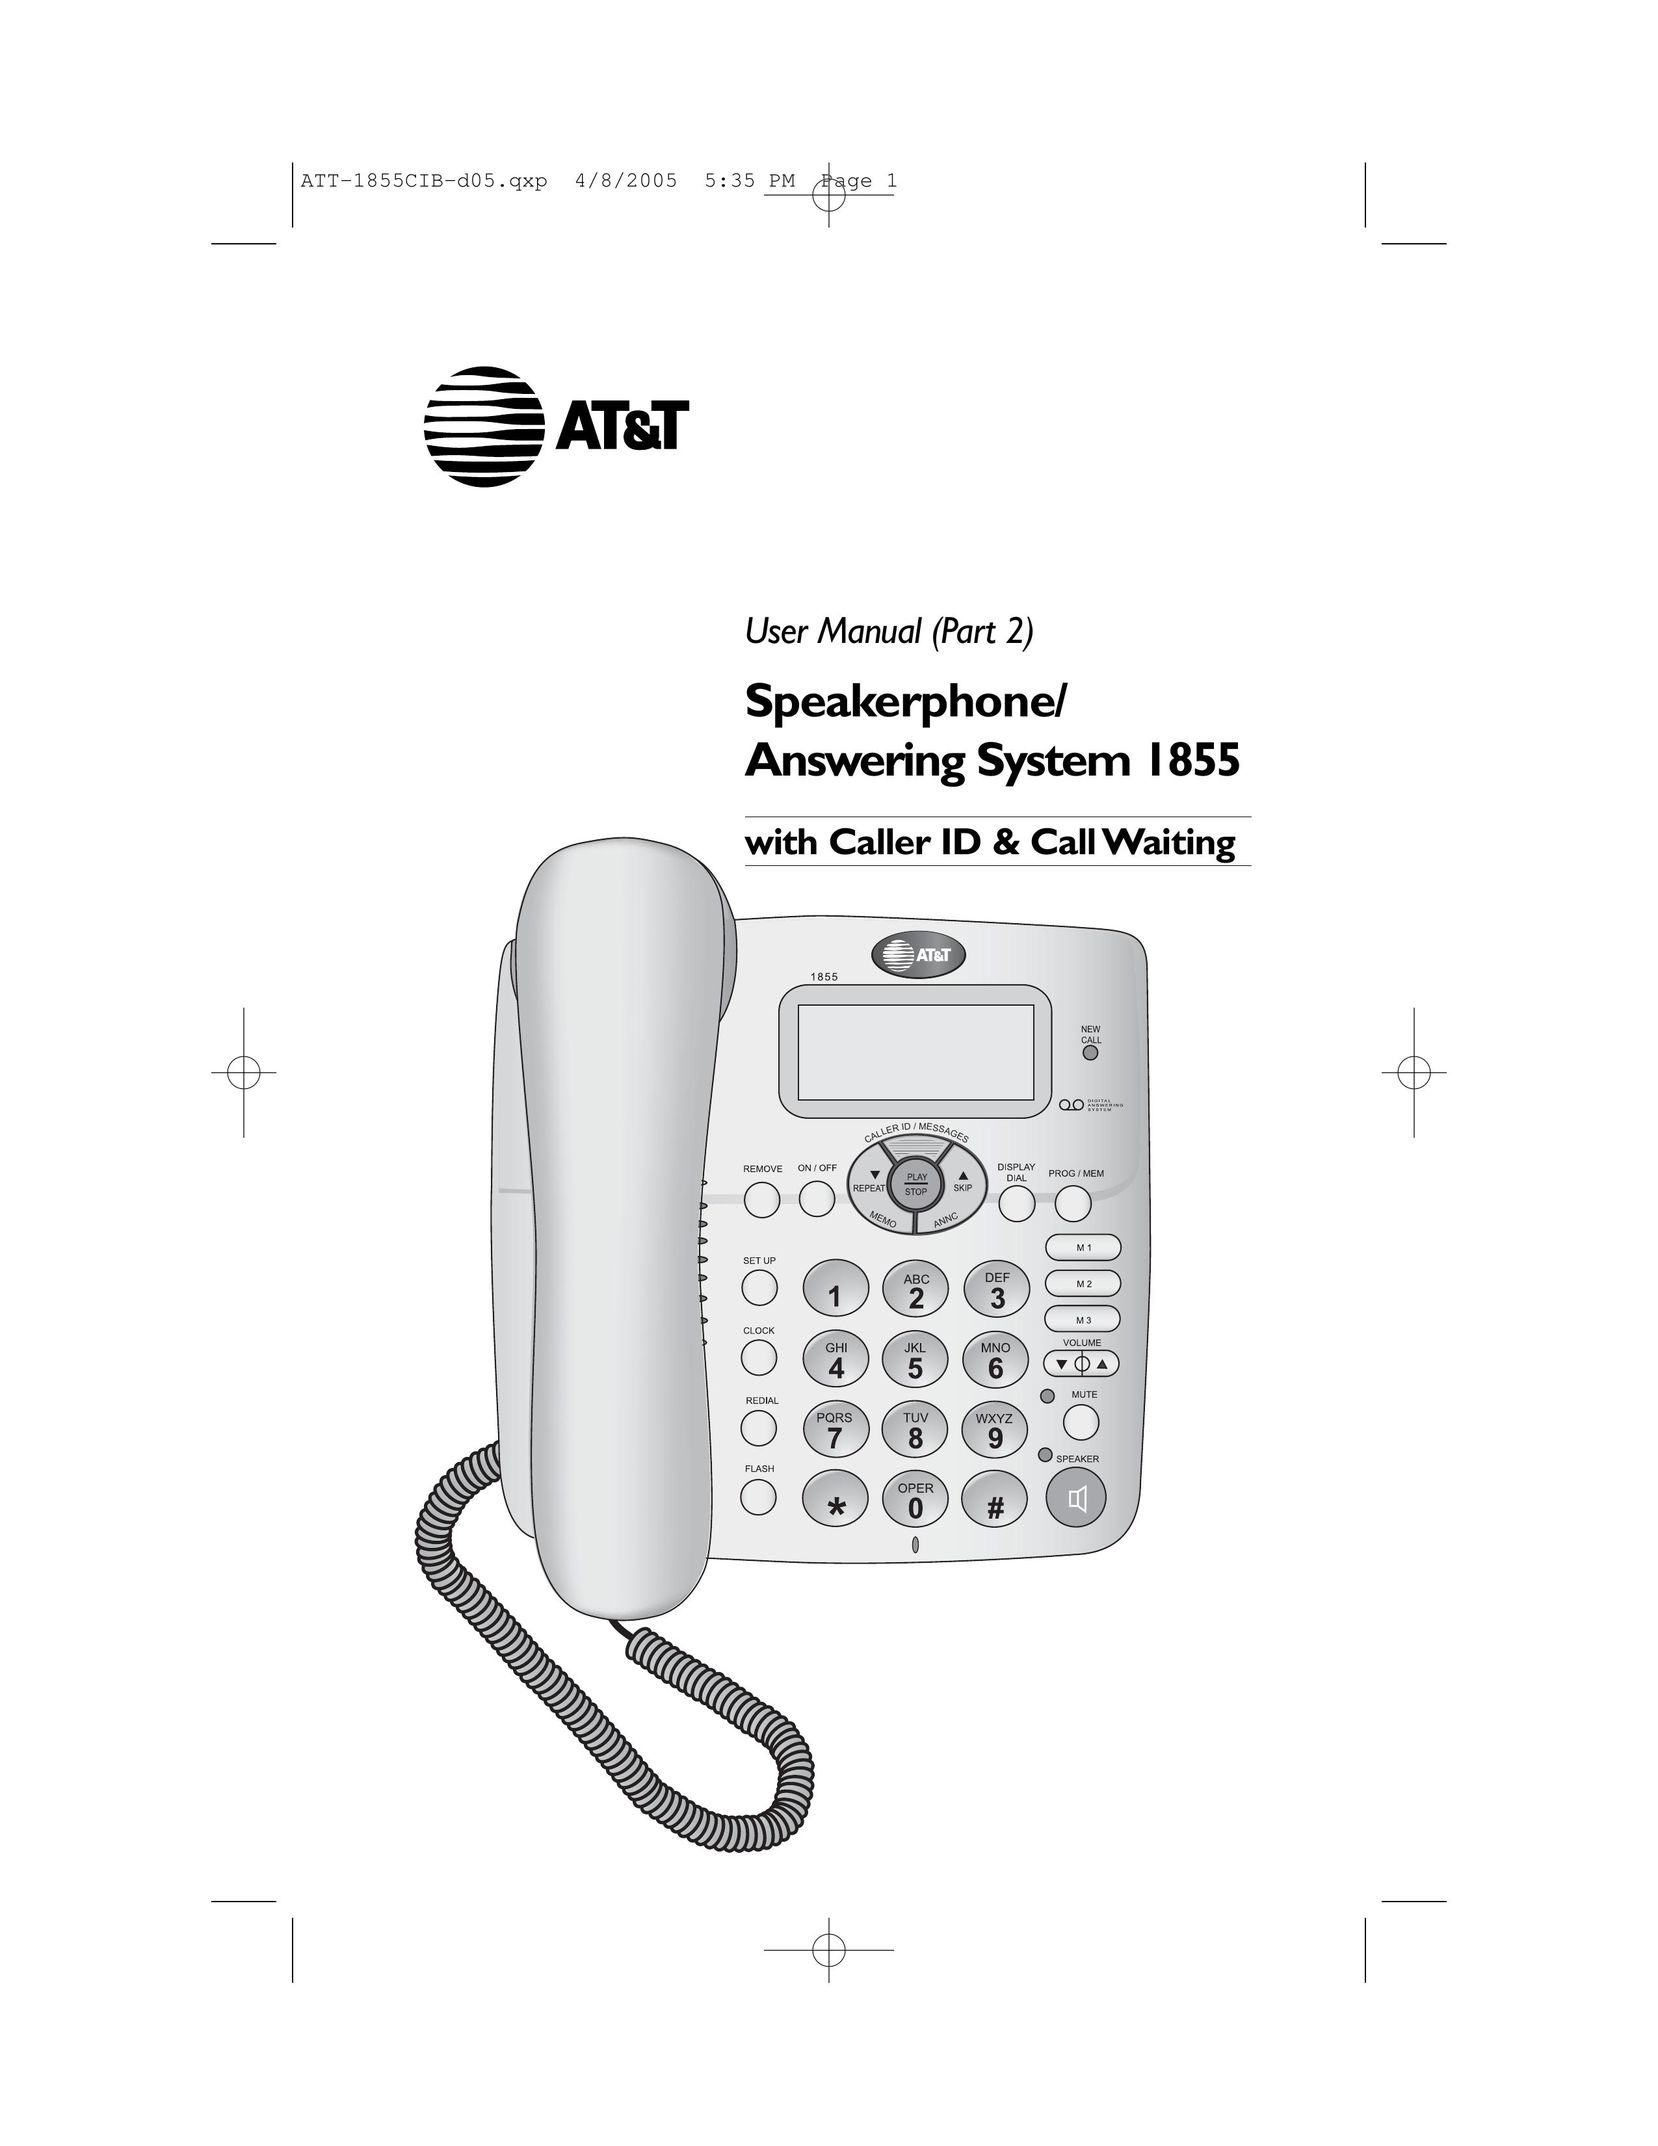 AT&T 1855 Conference Phone User Manual